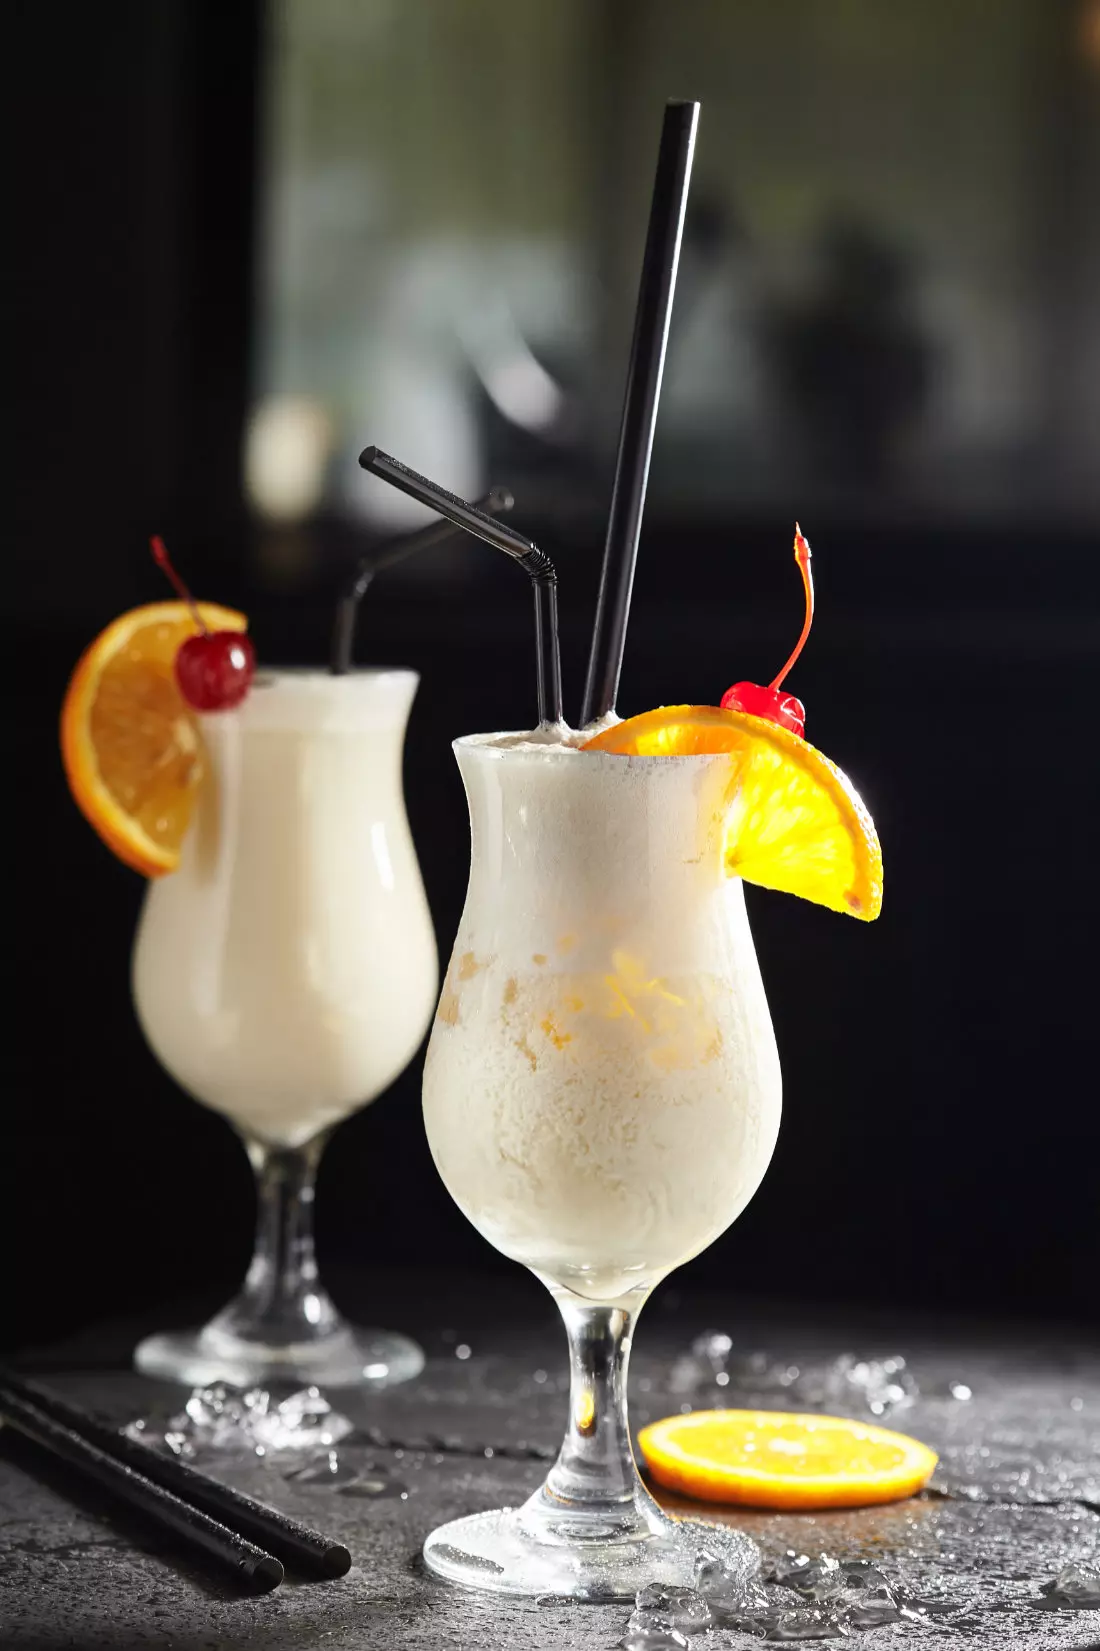 Pina Colada - Cocktail with Cream, Pineapple Juice and Rum